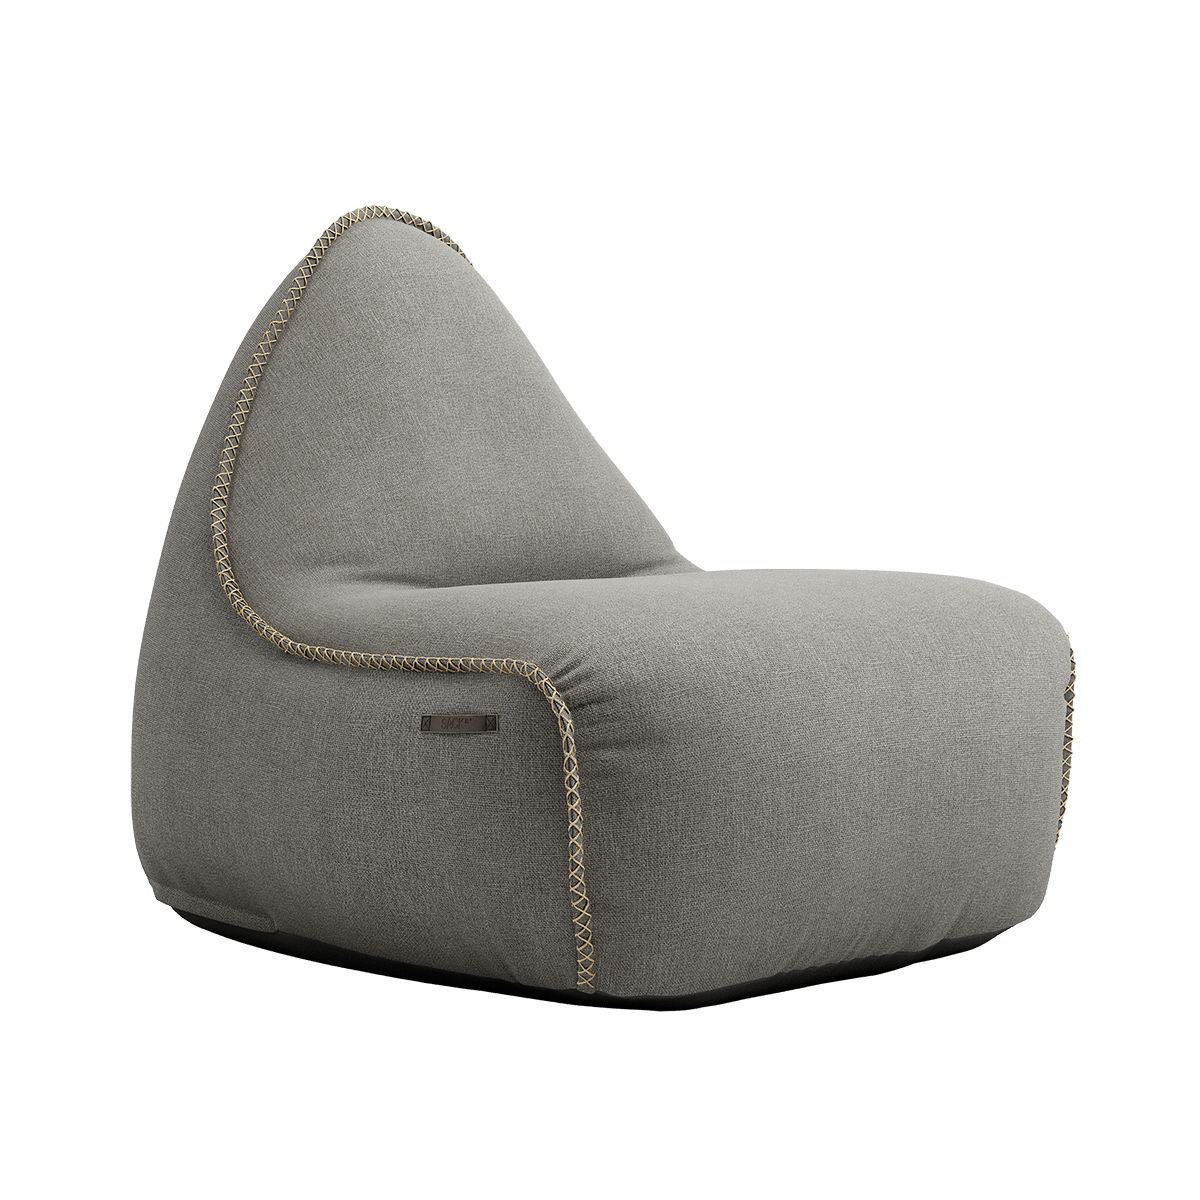 variant_8567007% | Medley Lounge Chair [Contract] - Medley Grey | SACKit